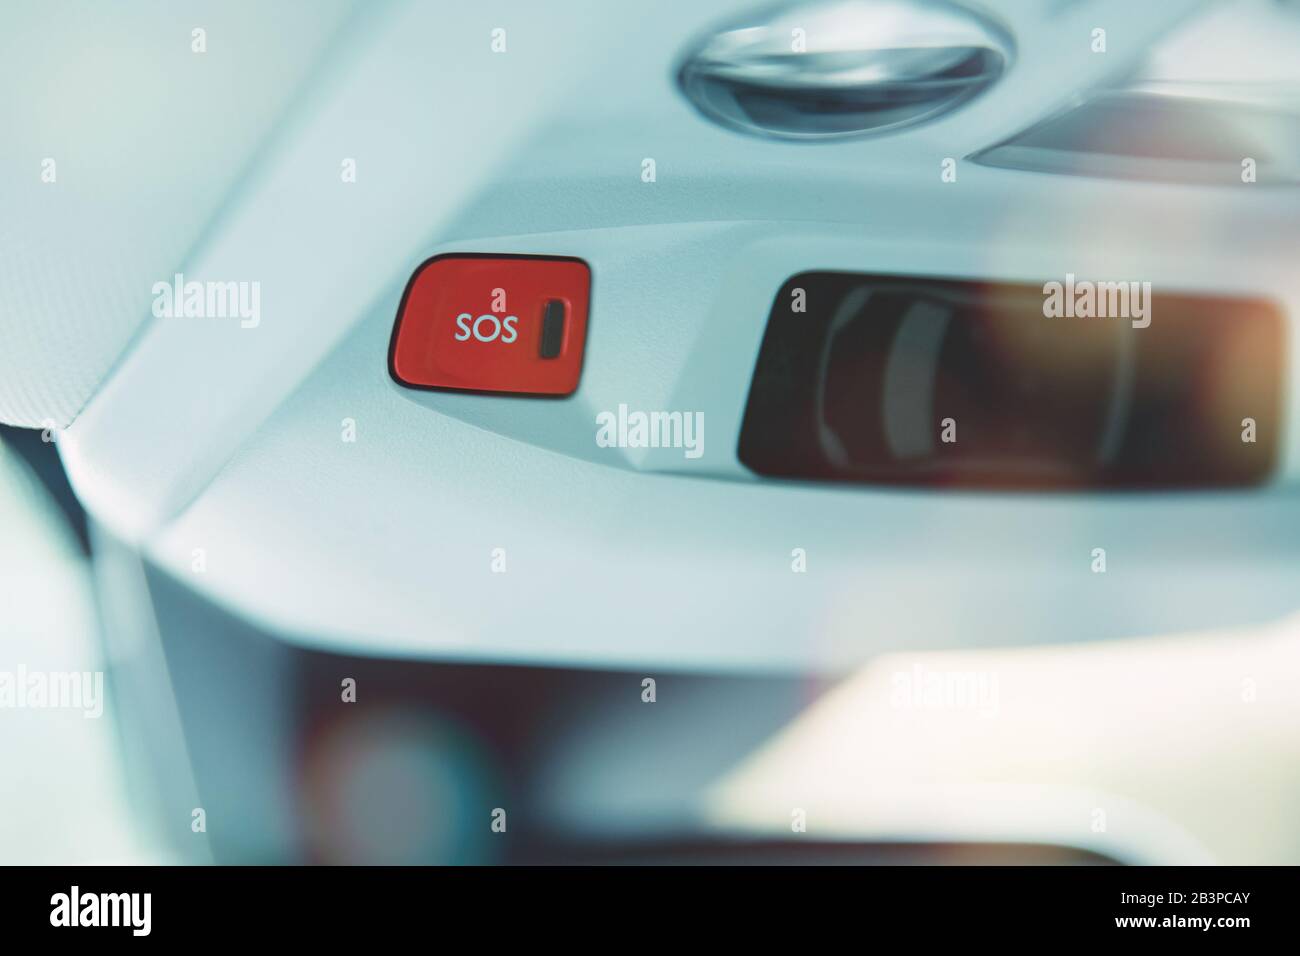 SOS sign in modern car designed to call for help after car accident Stock Photo